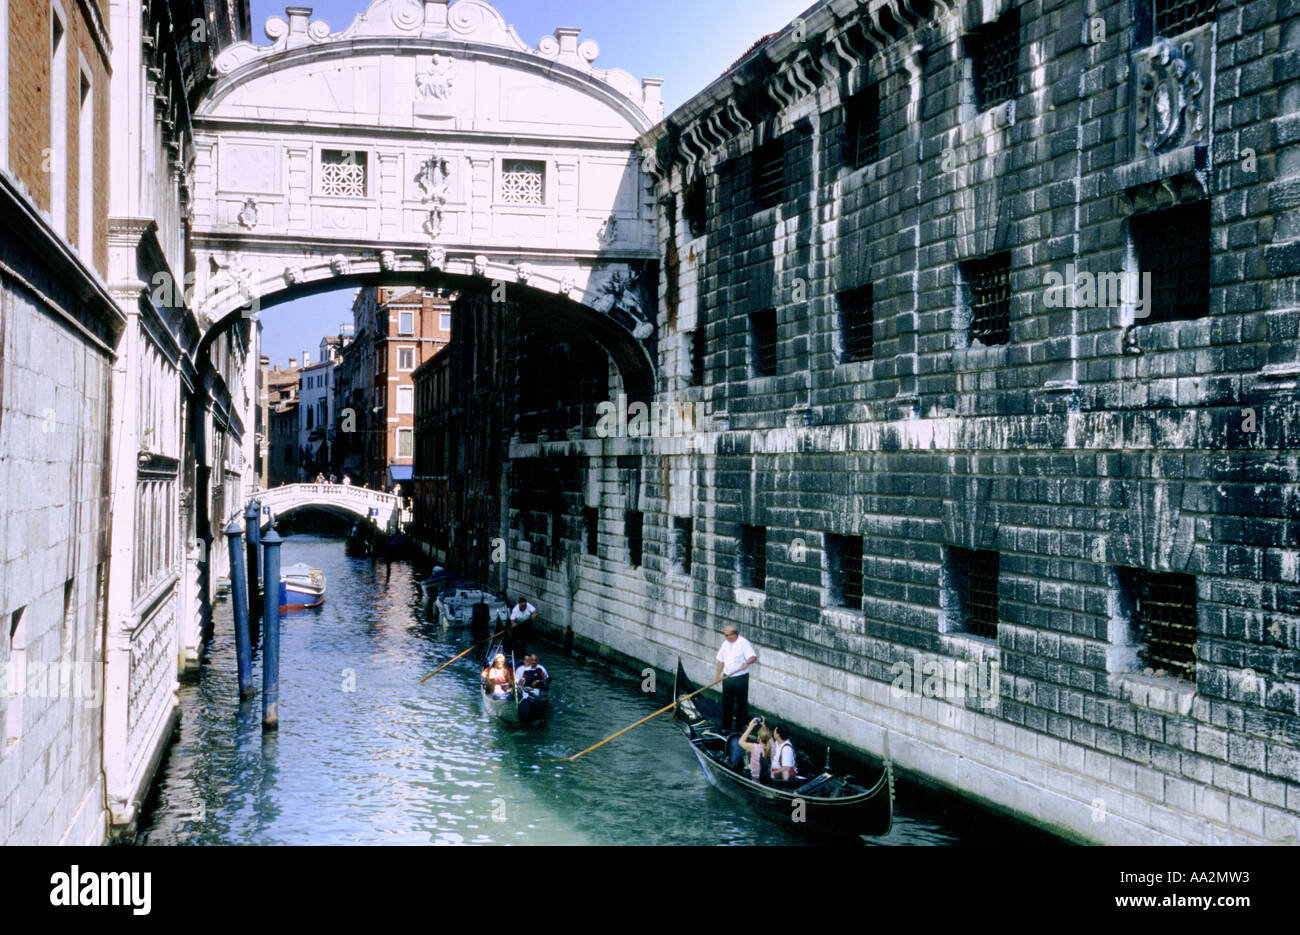 Italy, Venice, Palazzo Ducale Doges Palace and Bridge of Sighs with old prison, stone walls connected by bridge above canal with Stock Photo